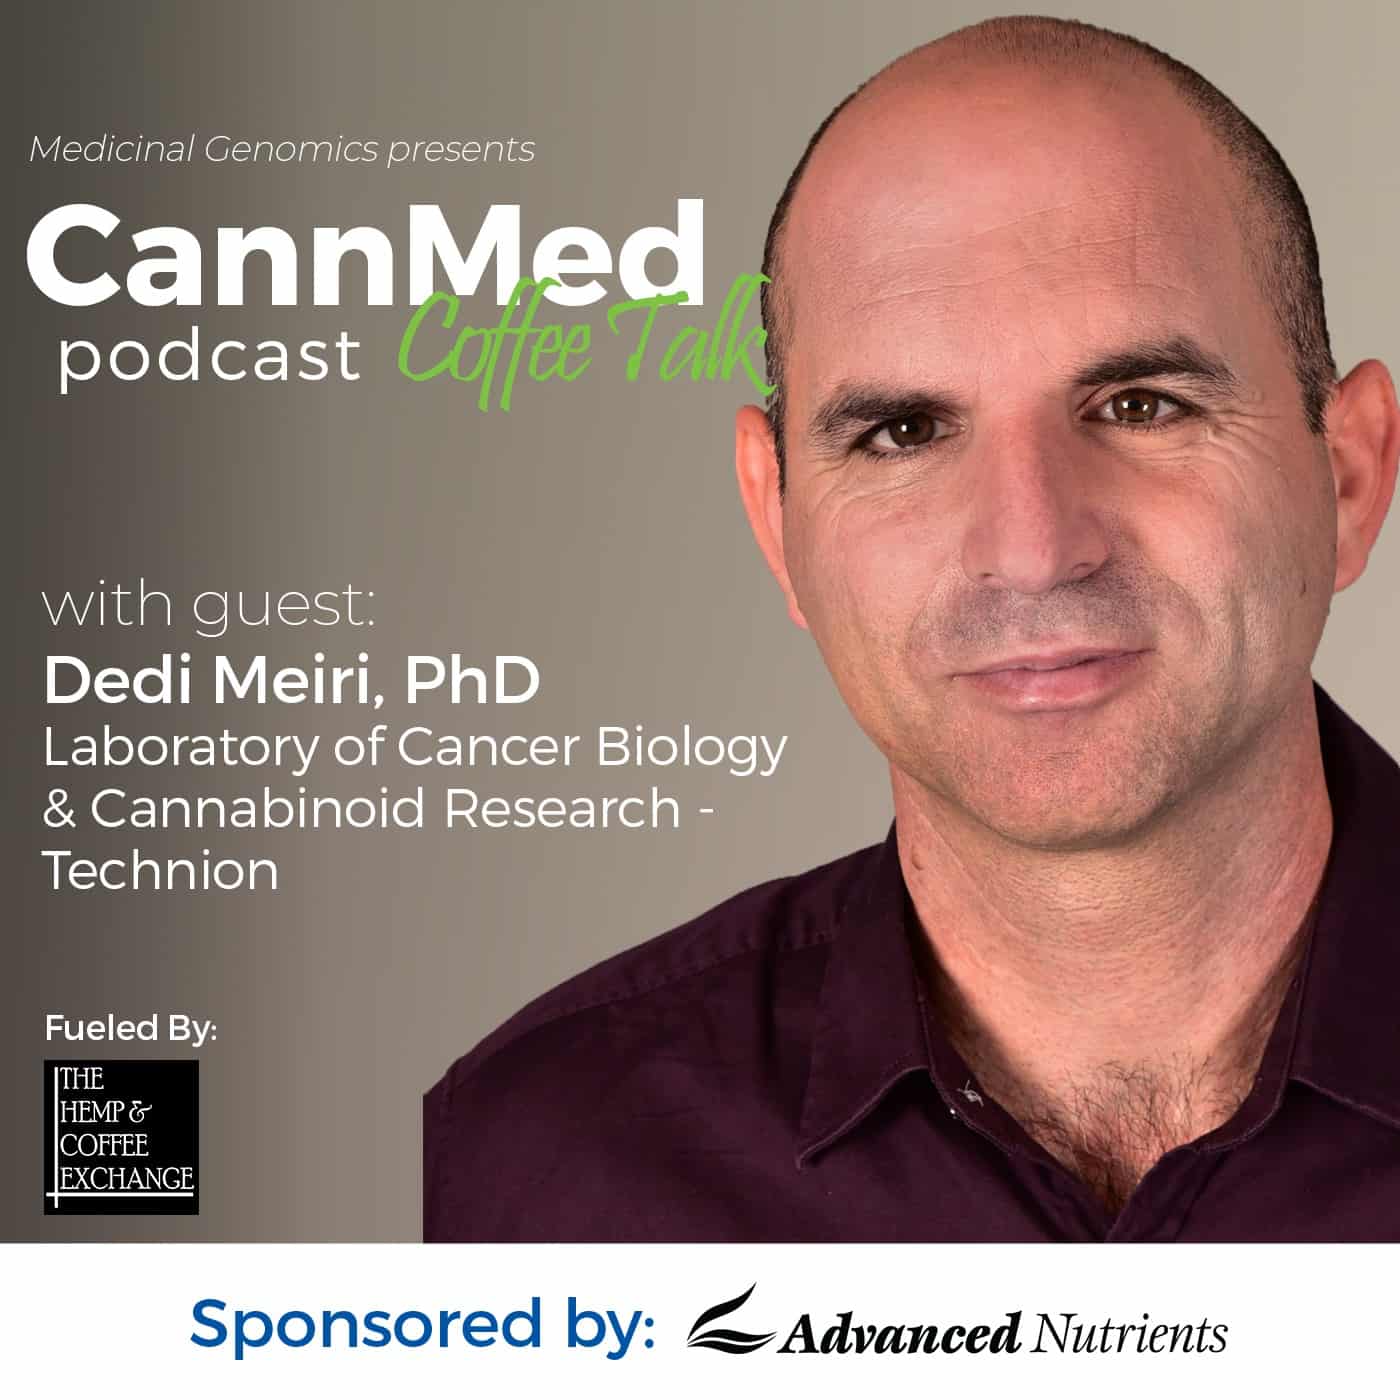 Featured image for “Identifying the Cancer-Killing Cannabinoids with Dedi Meiri, PhD”